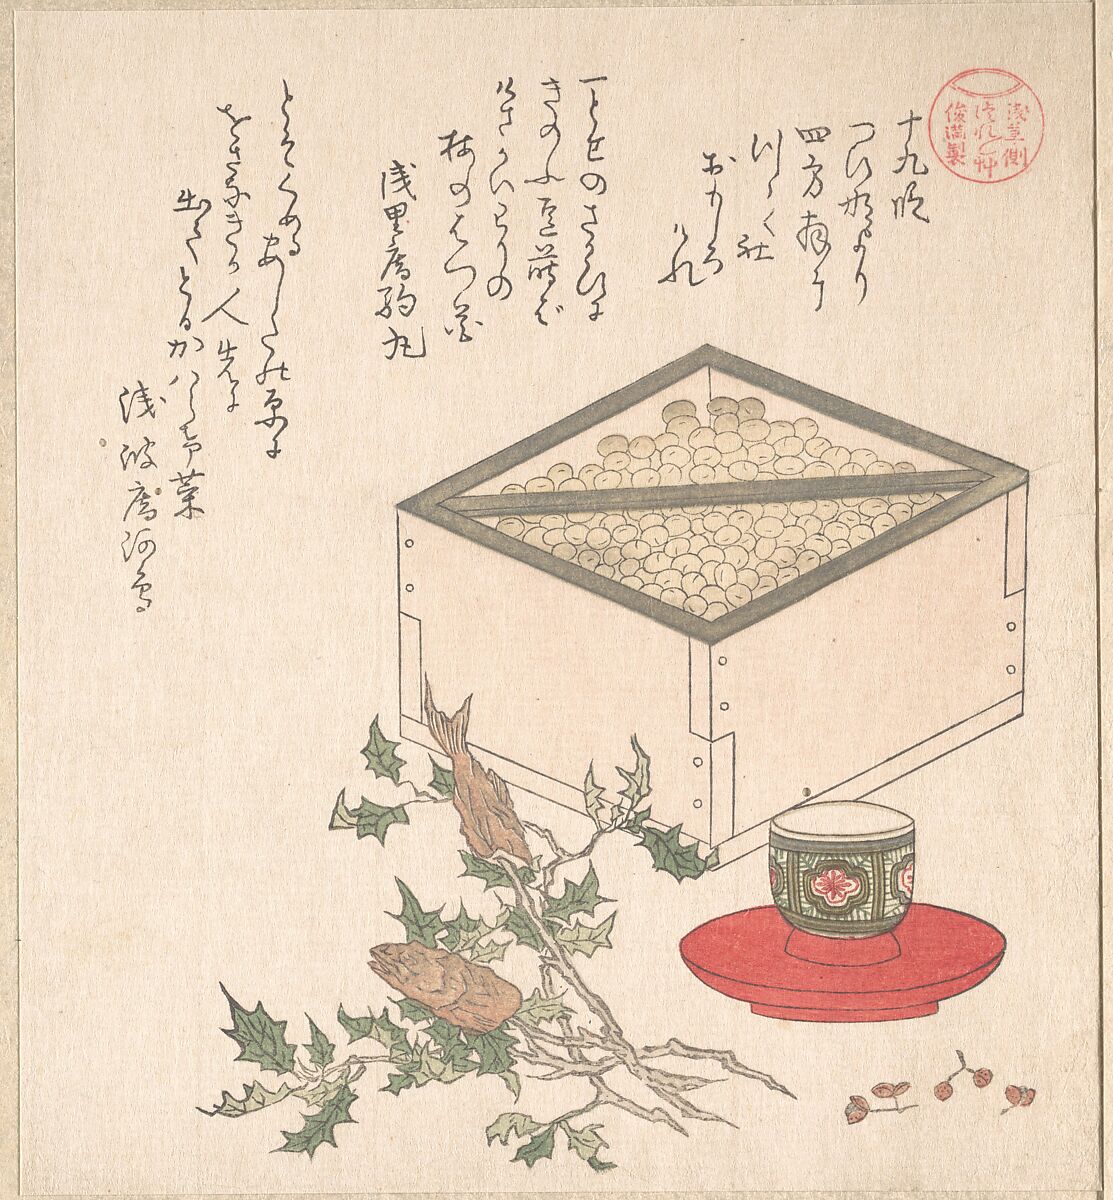 Green Peas in a Measure and Sprays of Hollyhock with Heads of Sardines; Symbols Representing the Ceremony of Exorcising Demons, Kubo Shunman (Japanese, 1757–1820) (?), Woodblock print (surimono); ink and color on paper, Japan 